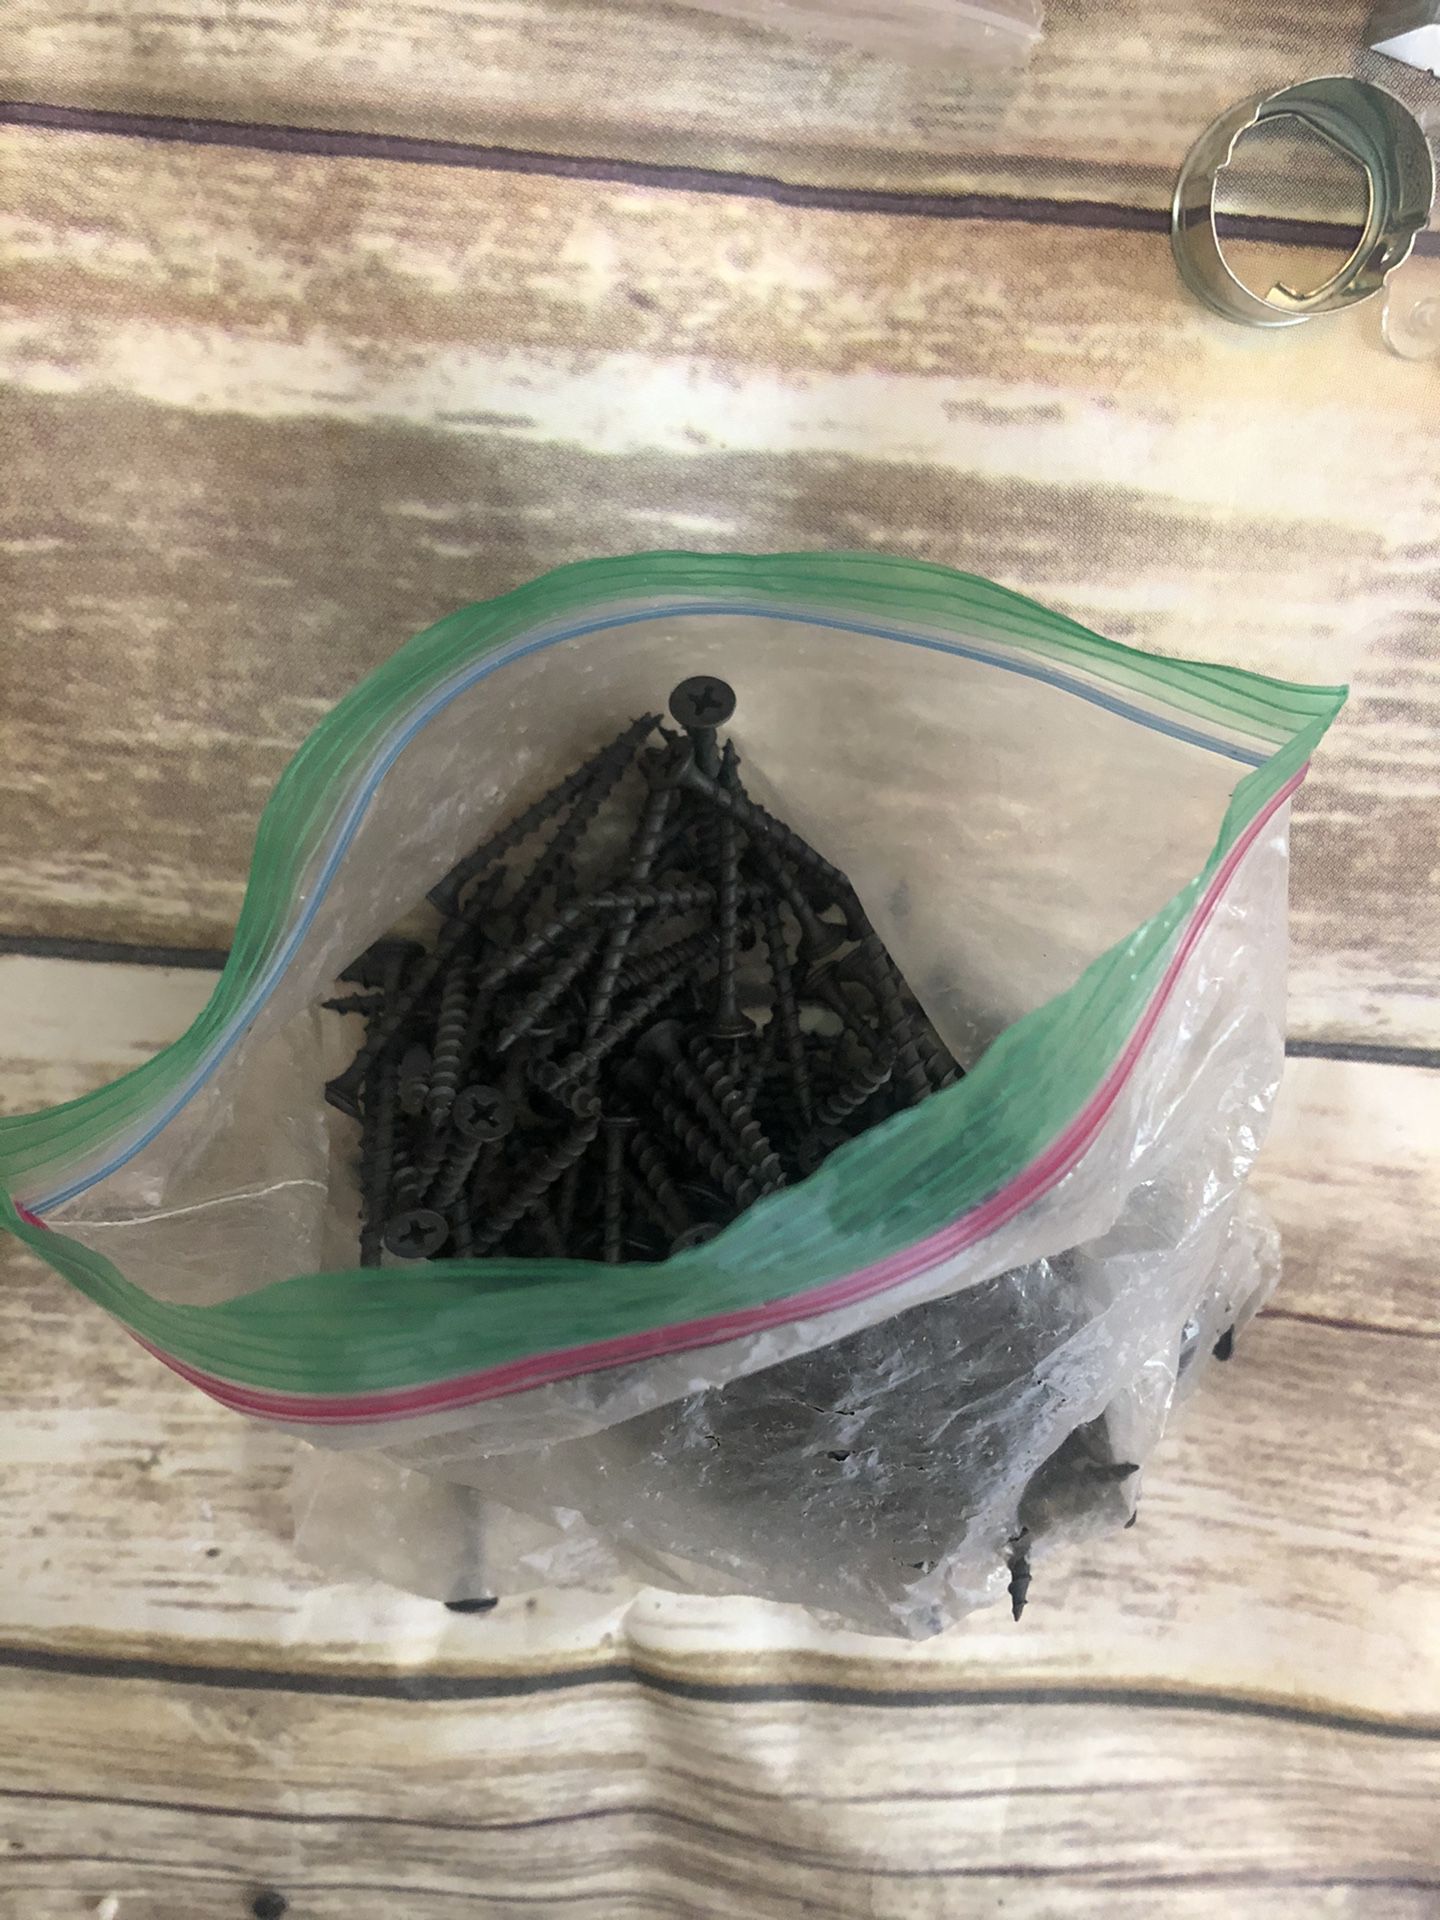 Bag of drywall screws and other tools/ fastening items